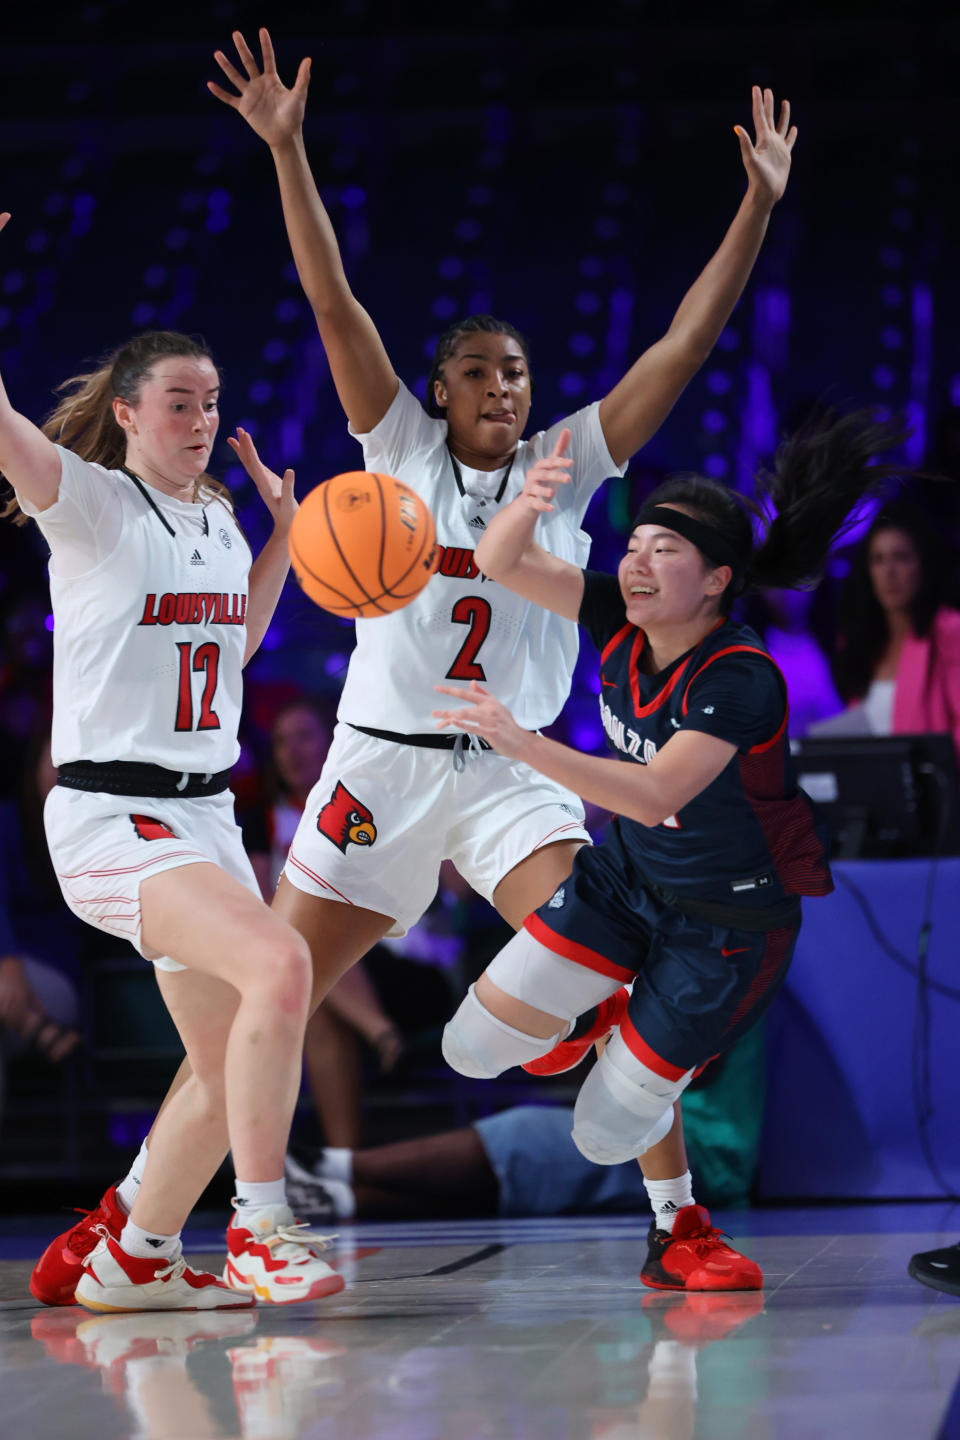 In a photo provided by Bahamas Visual Services, Gonzaga guard Kayleigh Truong, right, is defended by Louisville guard Payton Verhulst, left, and forward Nyla Harris during an NCAA college basketball game in the Battle 4 Atlantis at Paradise Island, Bahamas, Saturday, Nov. 19, 2022. (Tim Aylen/Bahamas Visual Services via AP)